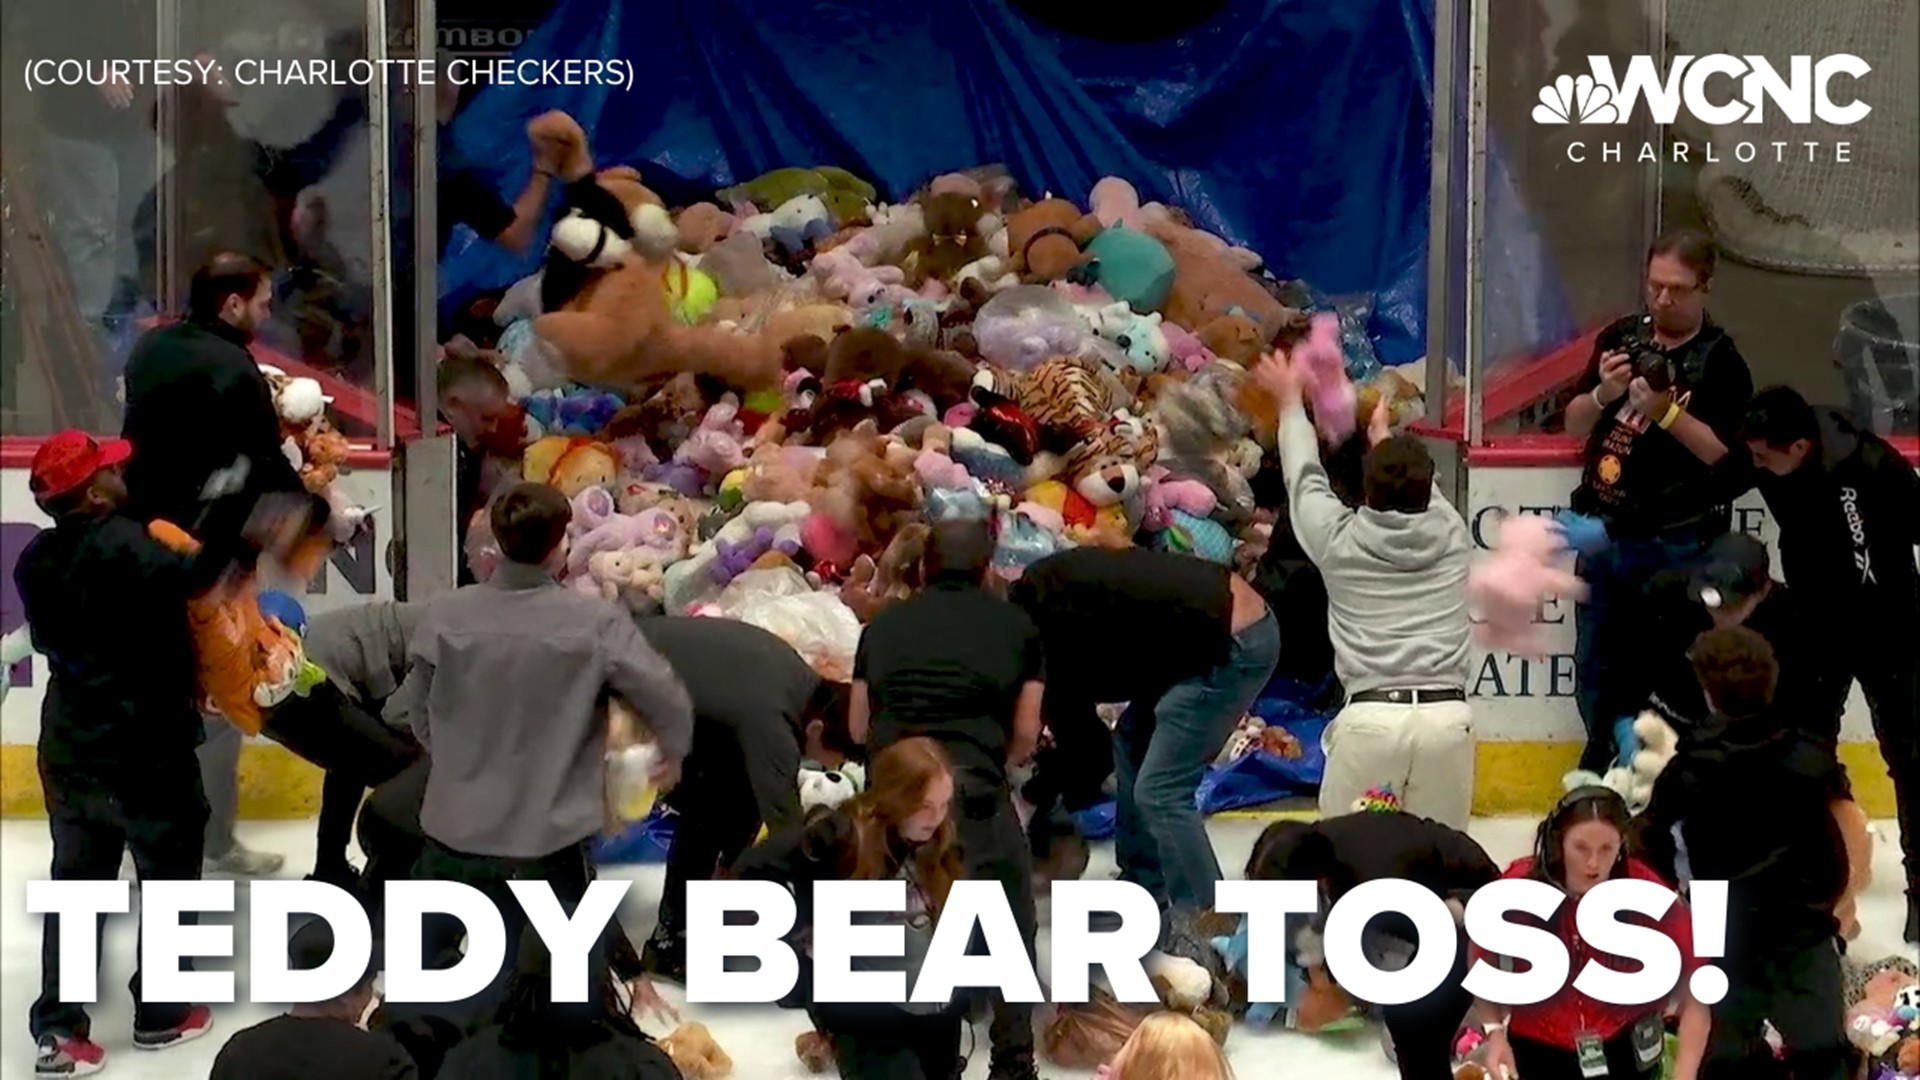 More than 4,100 stuffed animals are going to kids in need this holiday season!